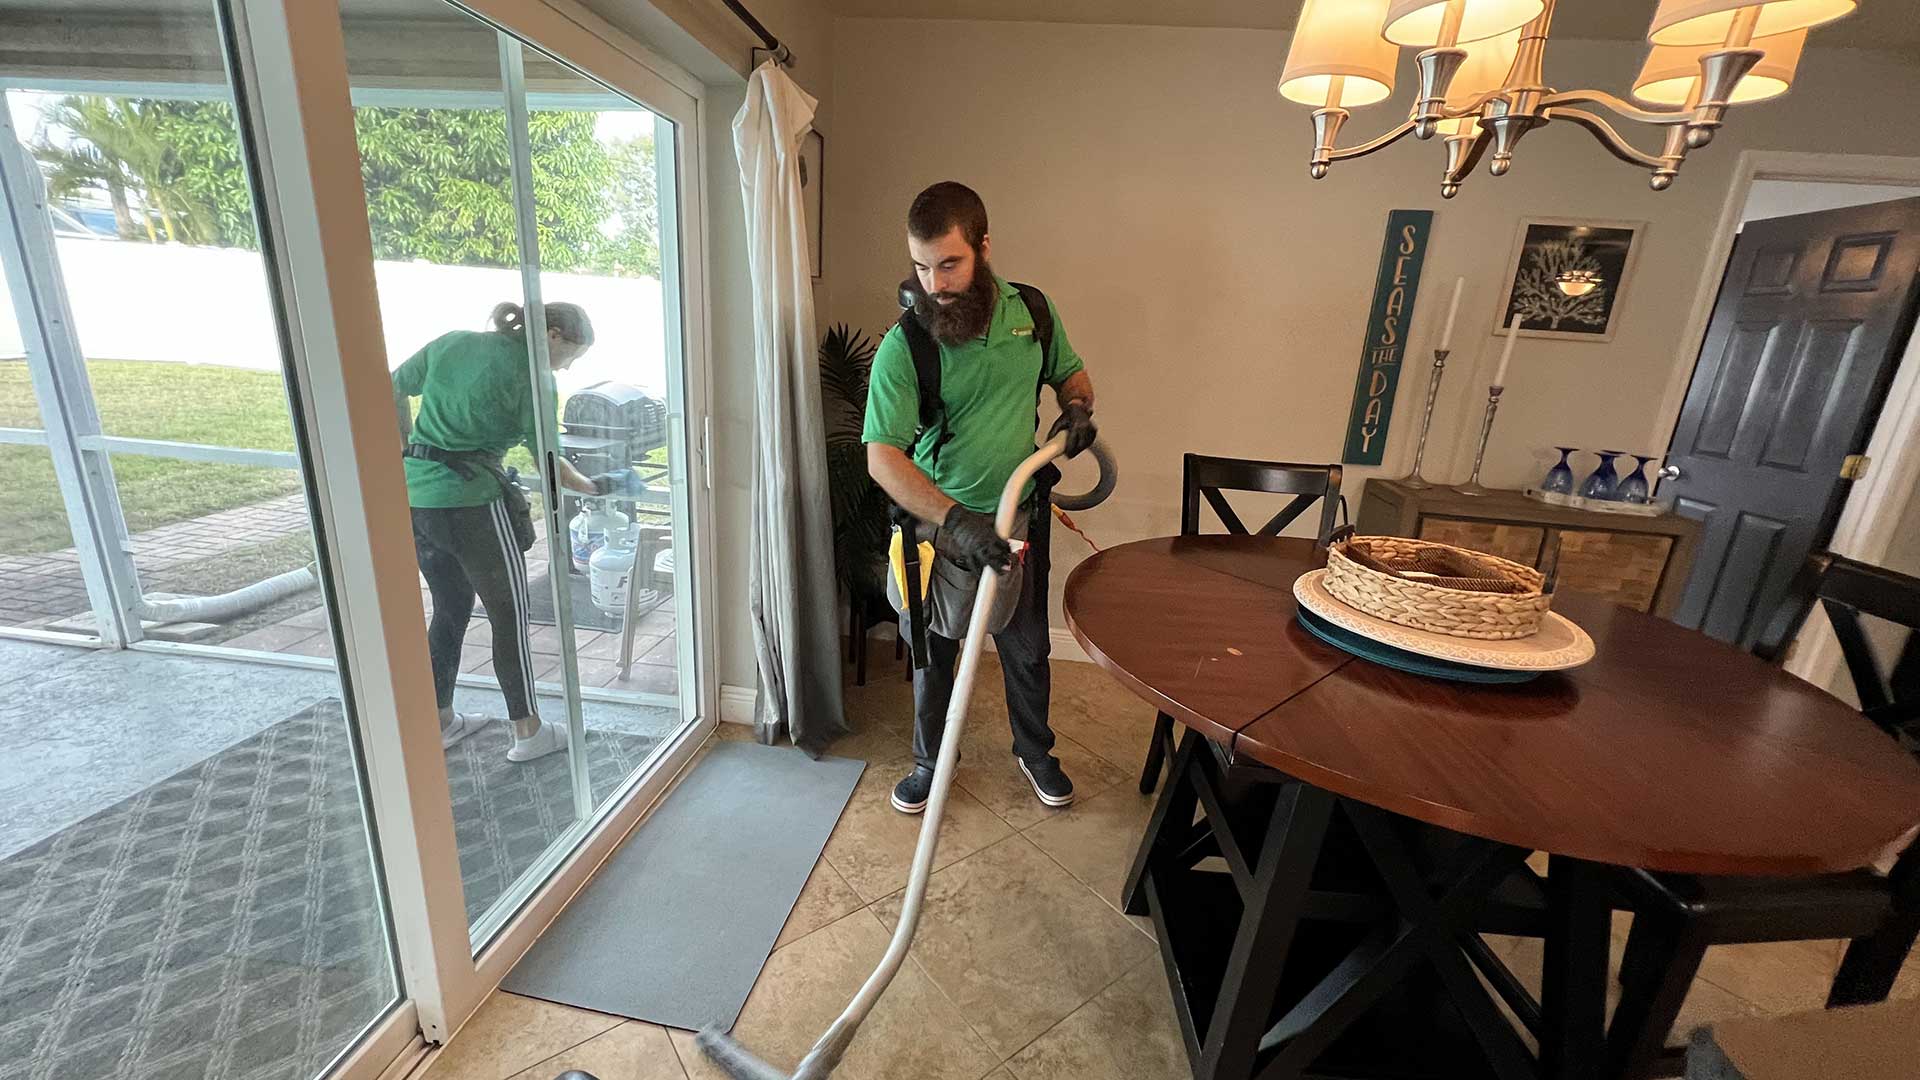 House deep cleaning - Jan 5 | Goldmillio cleaning service in Cape Coral https://www.google.com/maps/place/?cid=2863543821522134674